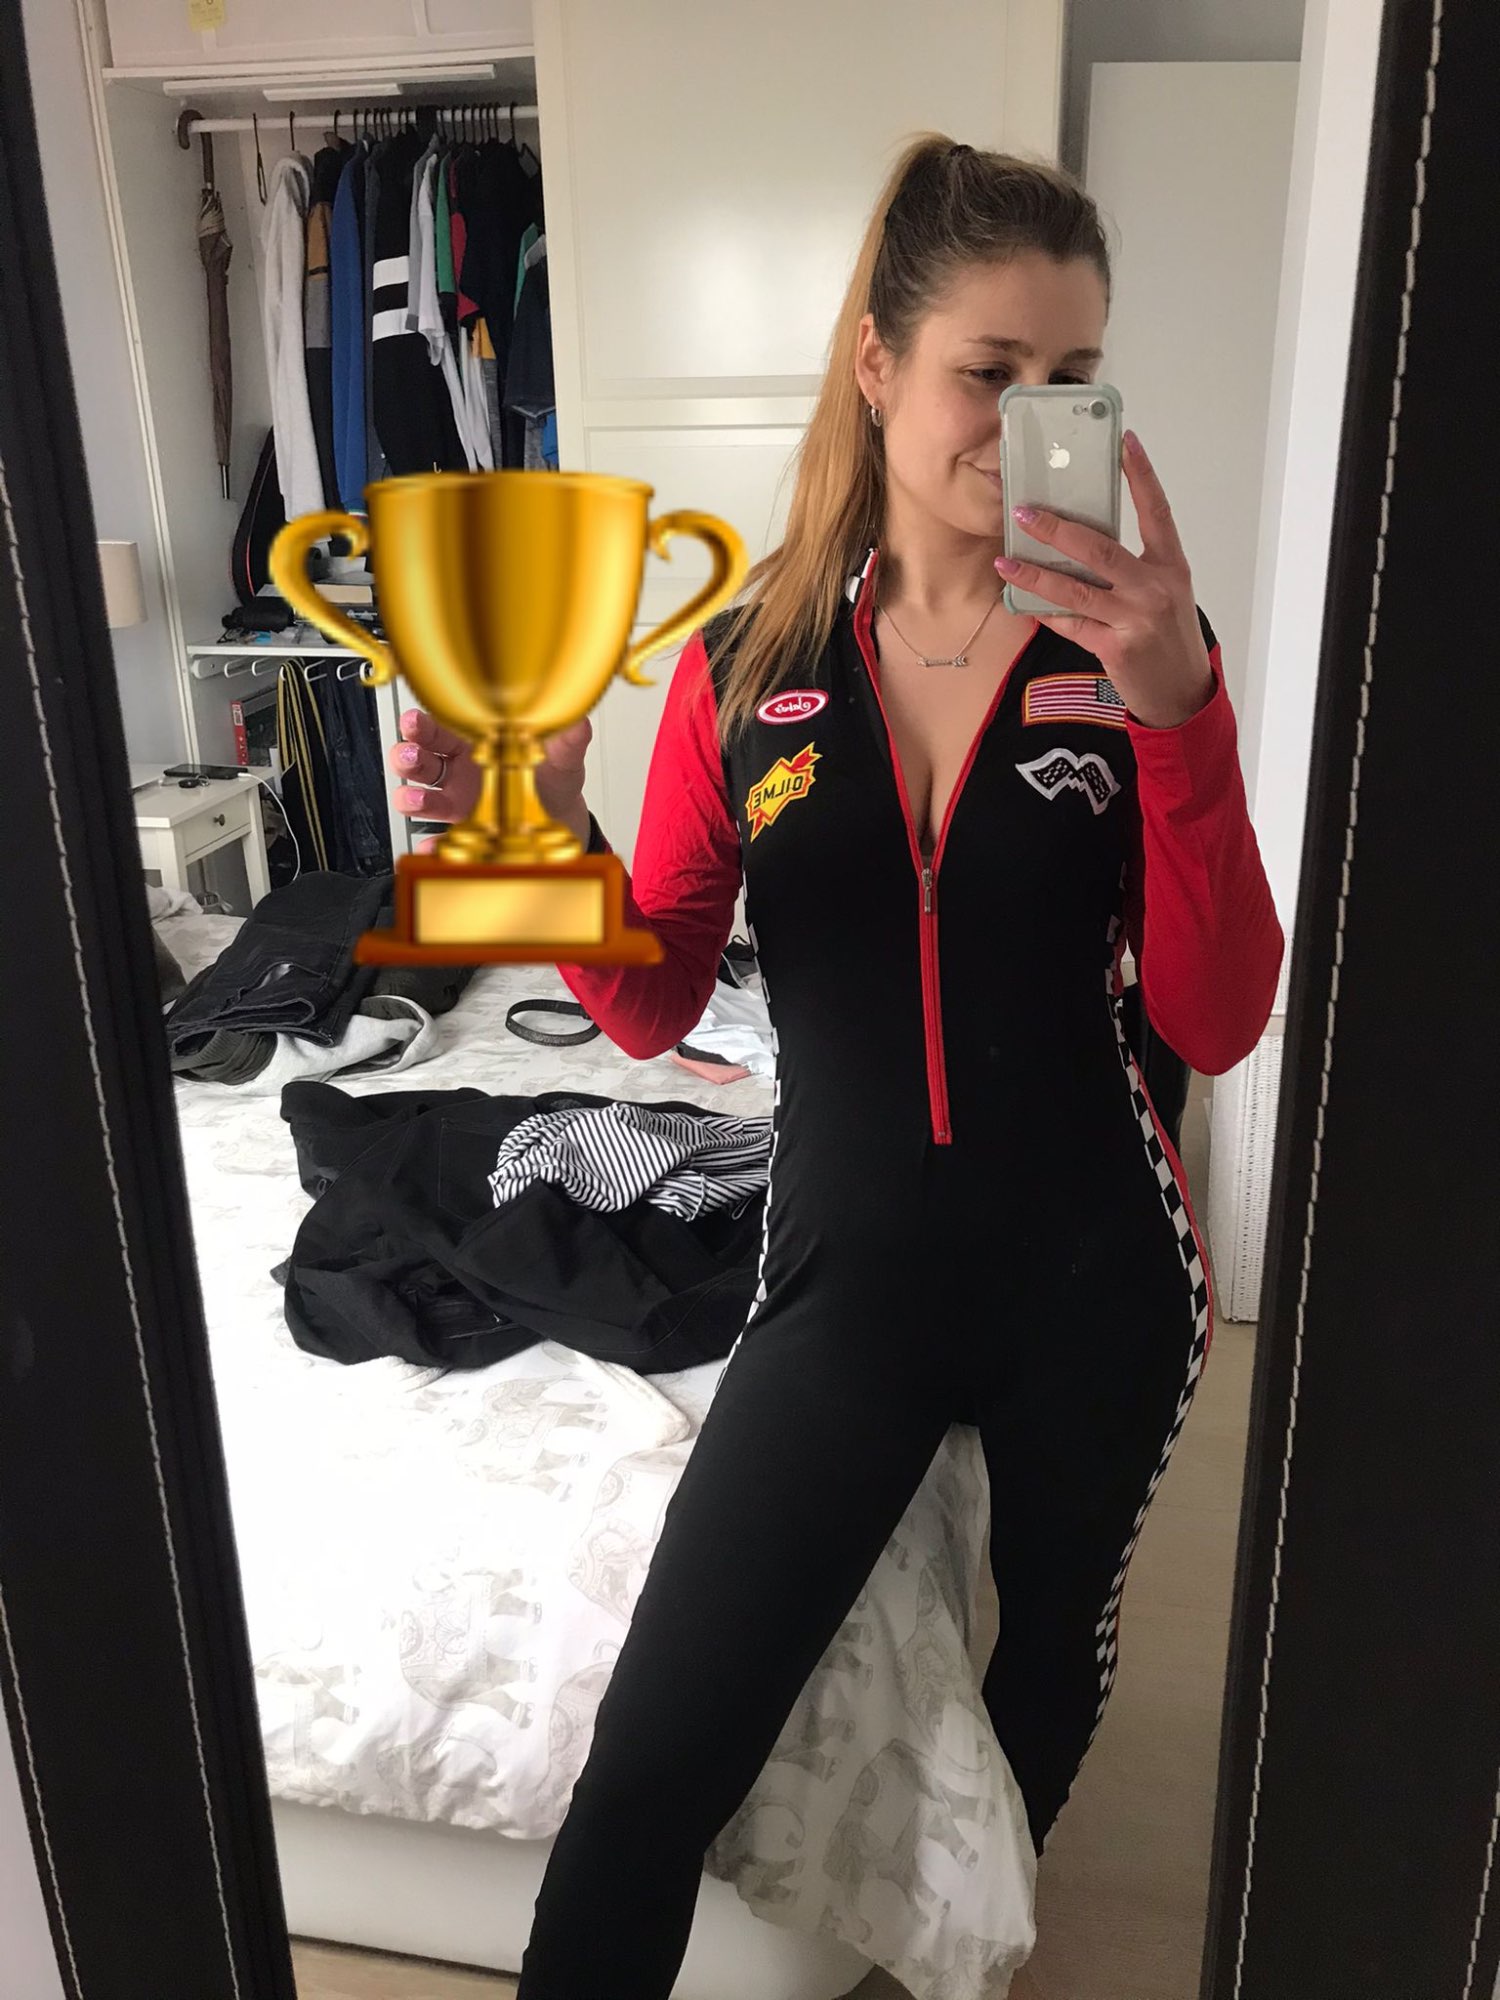 The sexiest woman in motorsport: Meet Leah Pritchett who has taken the Drag  Racing world by storm | The Irish Sun